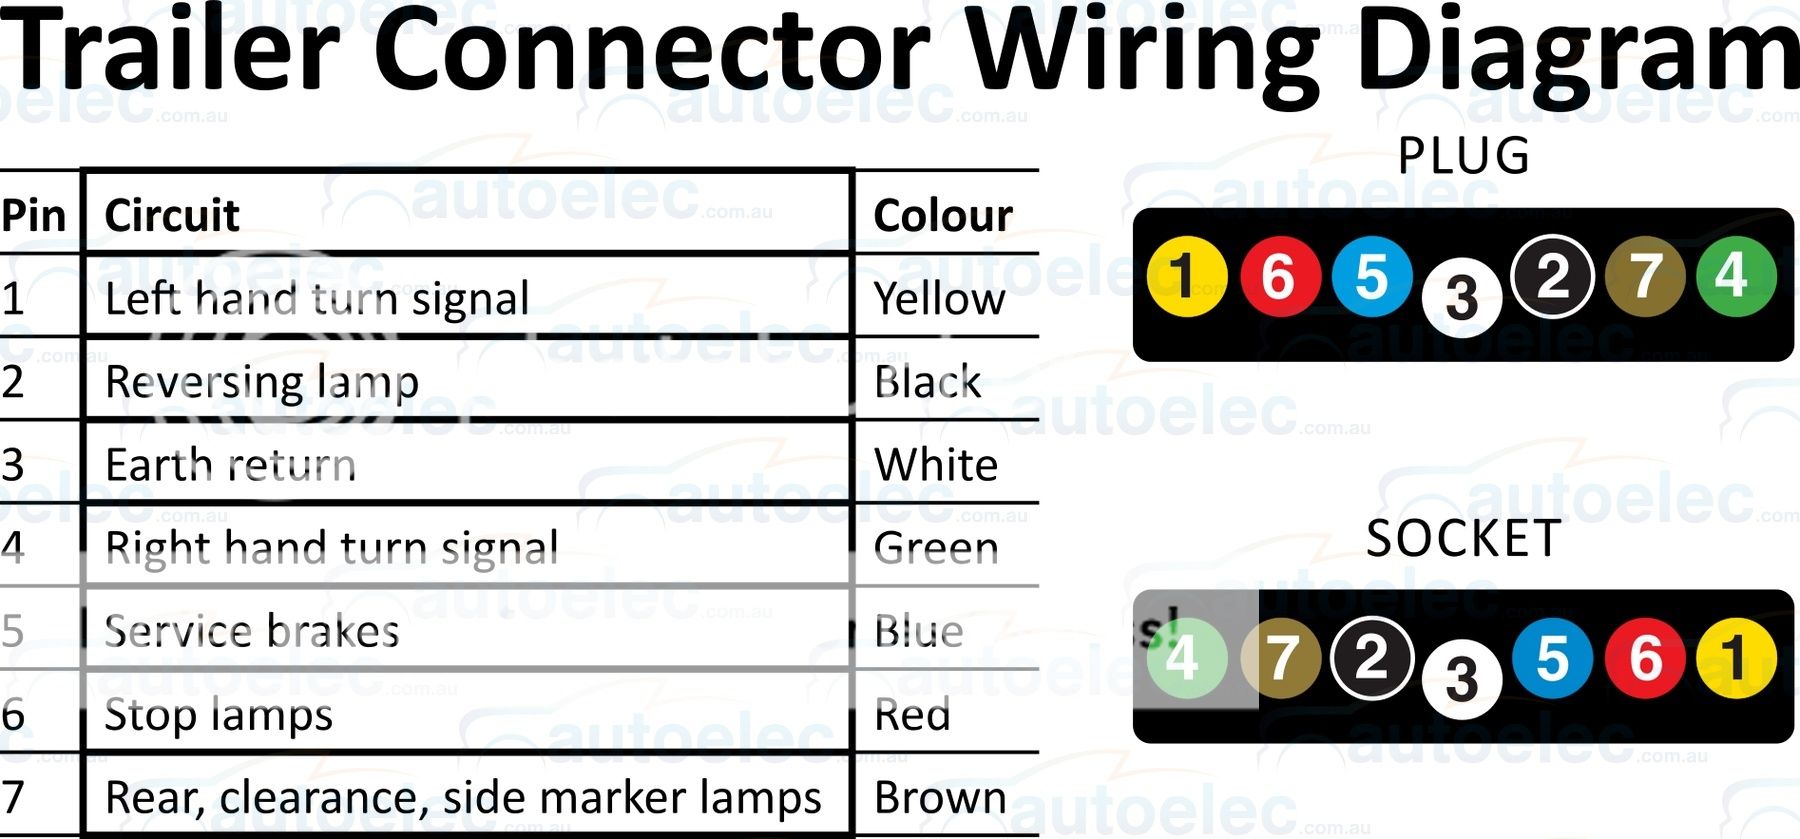 Wiring Diagram For A 7 Pin Trailer Connector - 5